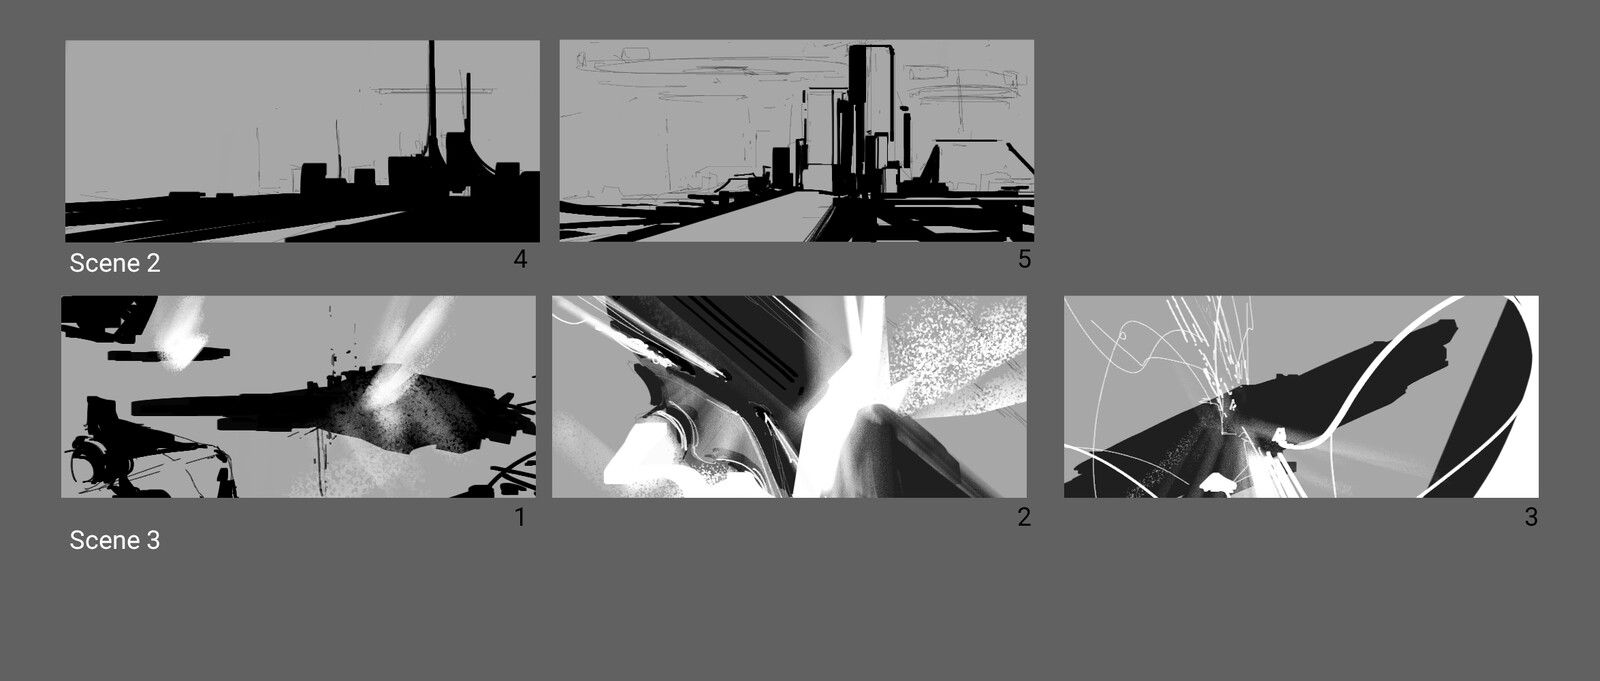 Sketches for the Narrative Trailer Illustrations-2